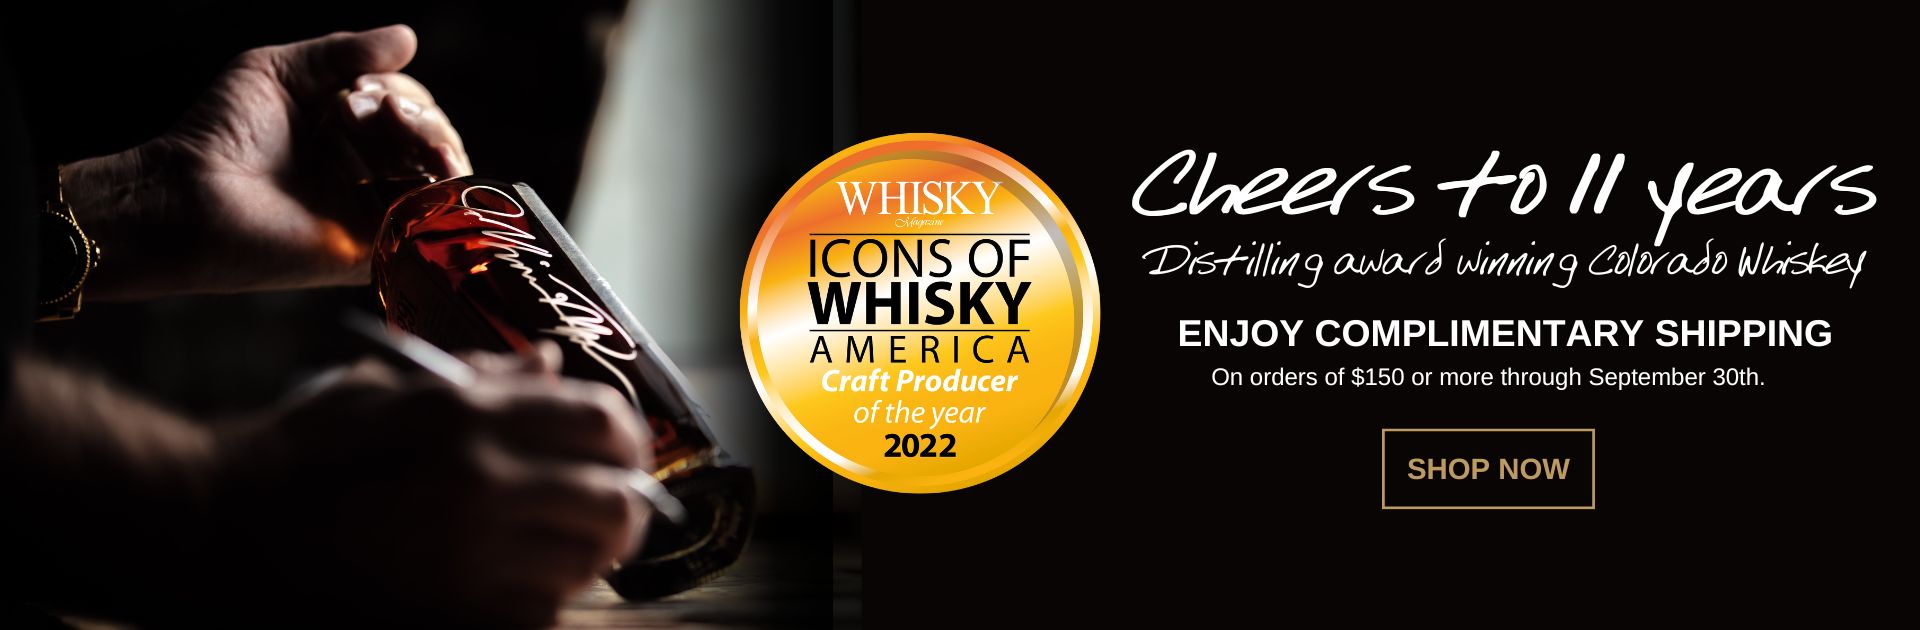 Cheers to 11 Years distilling award winning Colorado Whiskey - Complimentary Shipping over $150